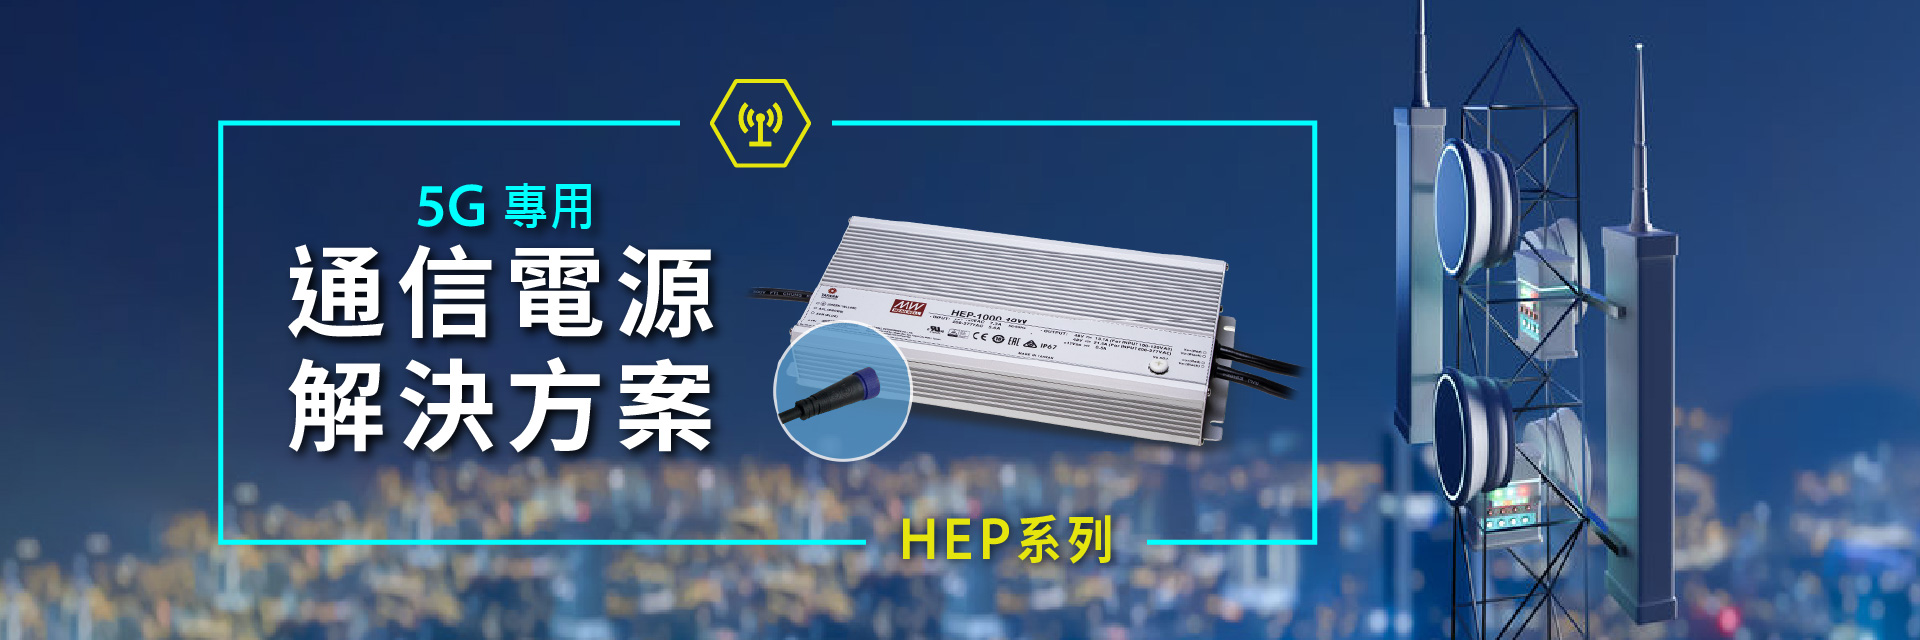 MEAN WELL 5G Telecommunication Power Solution: HEP series